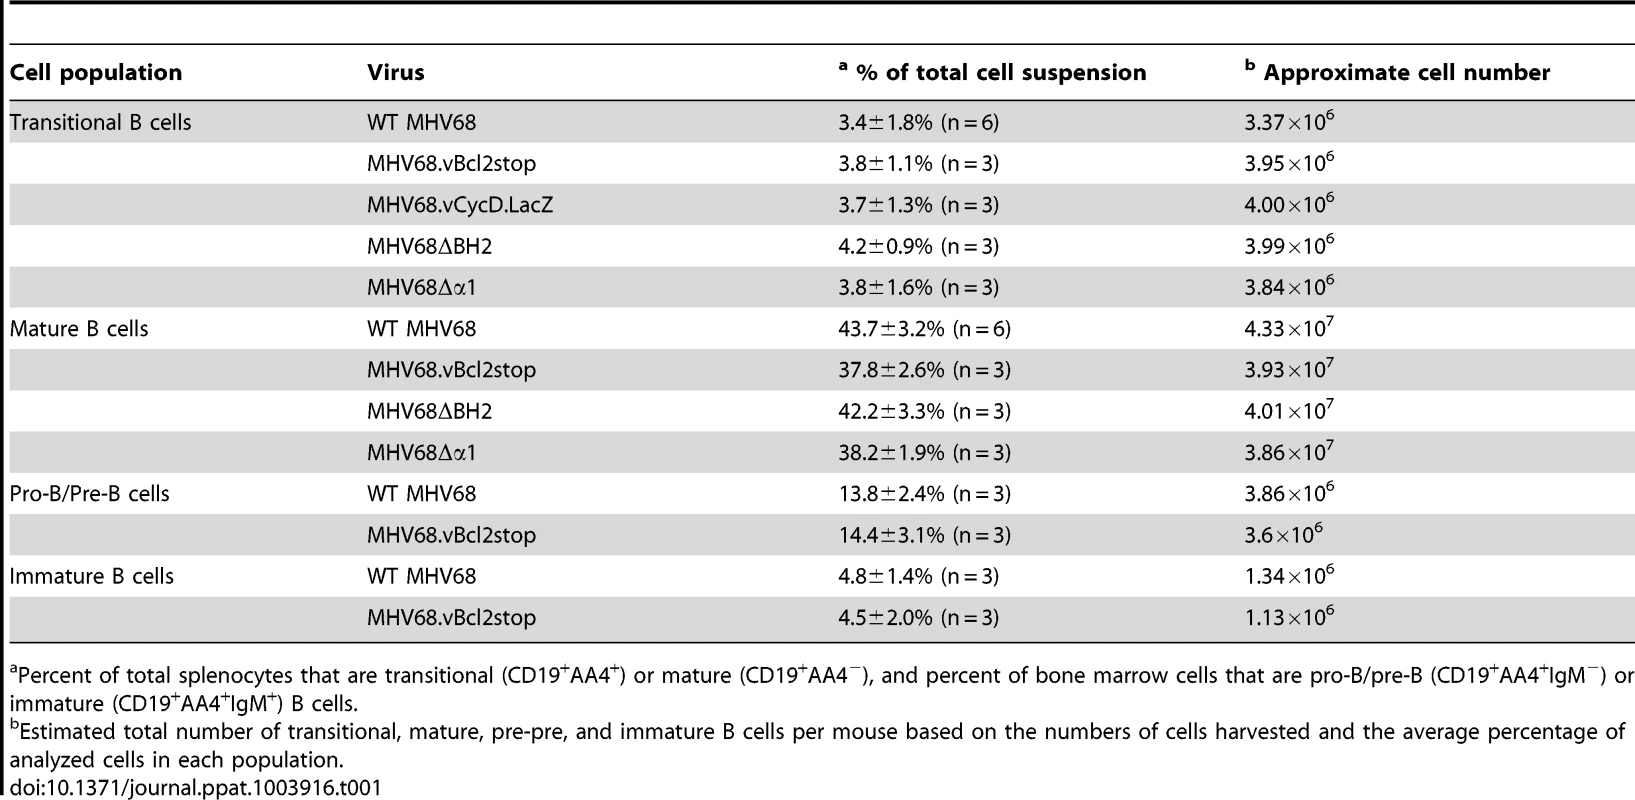 Percentages and approximate number of B cell populations following infection with wild-type and MHV68 mutant viruses.